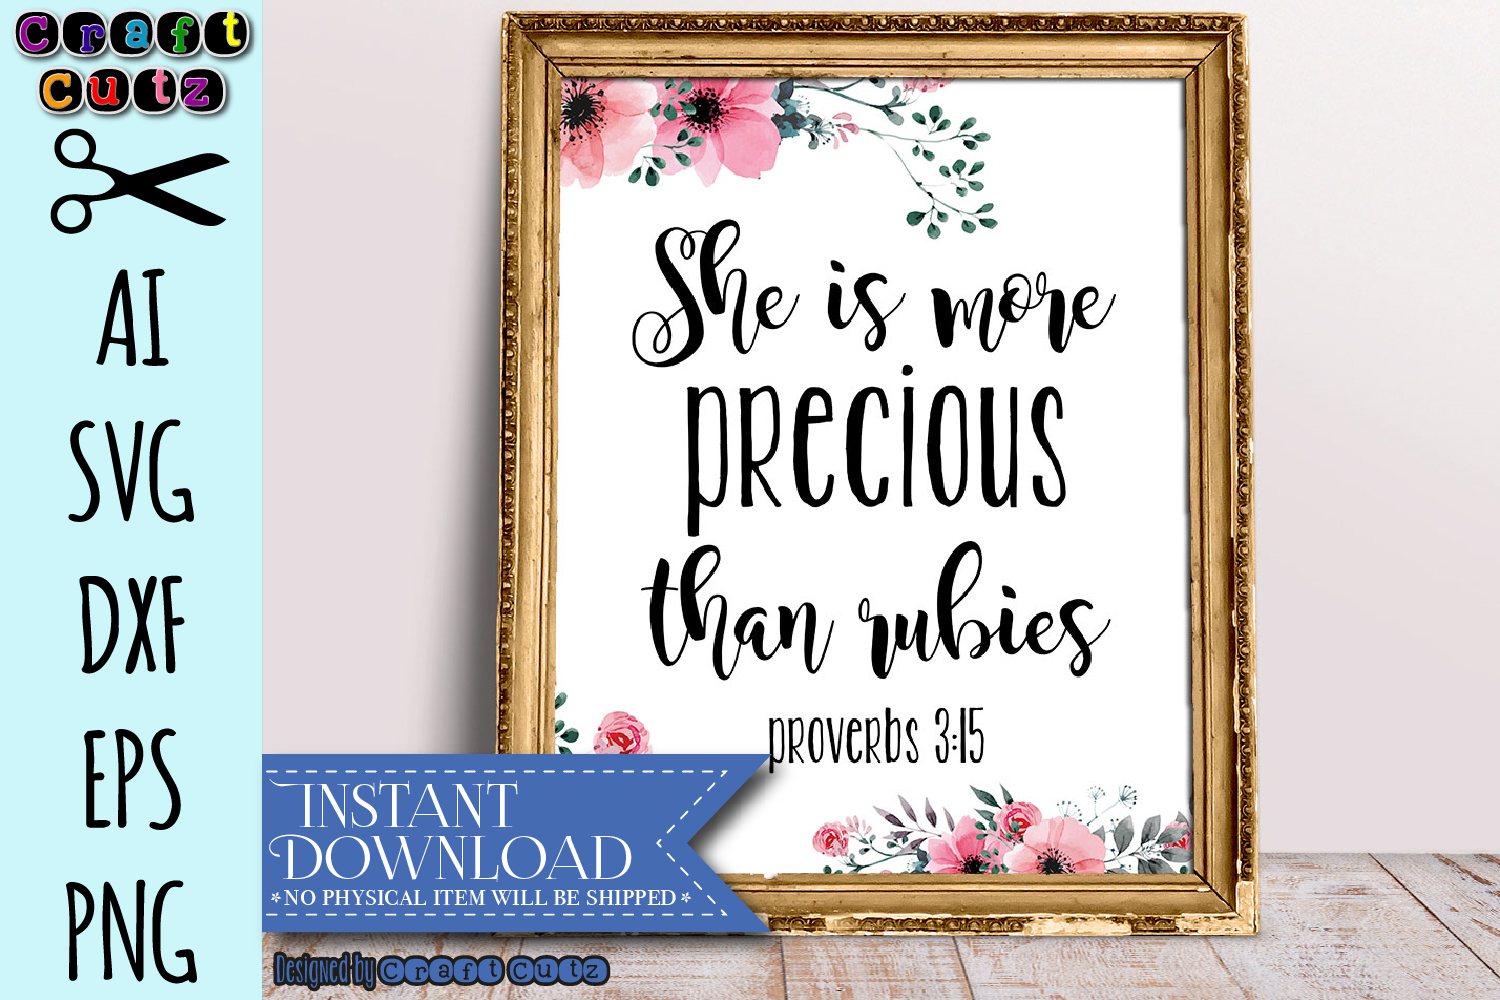 She is more precious than rubies Svg proverbs 315 Svg Etsy